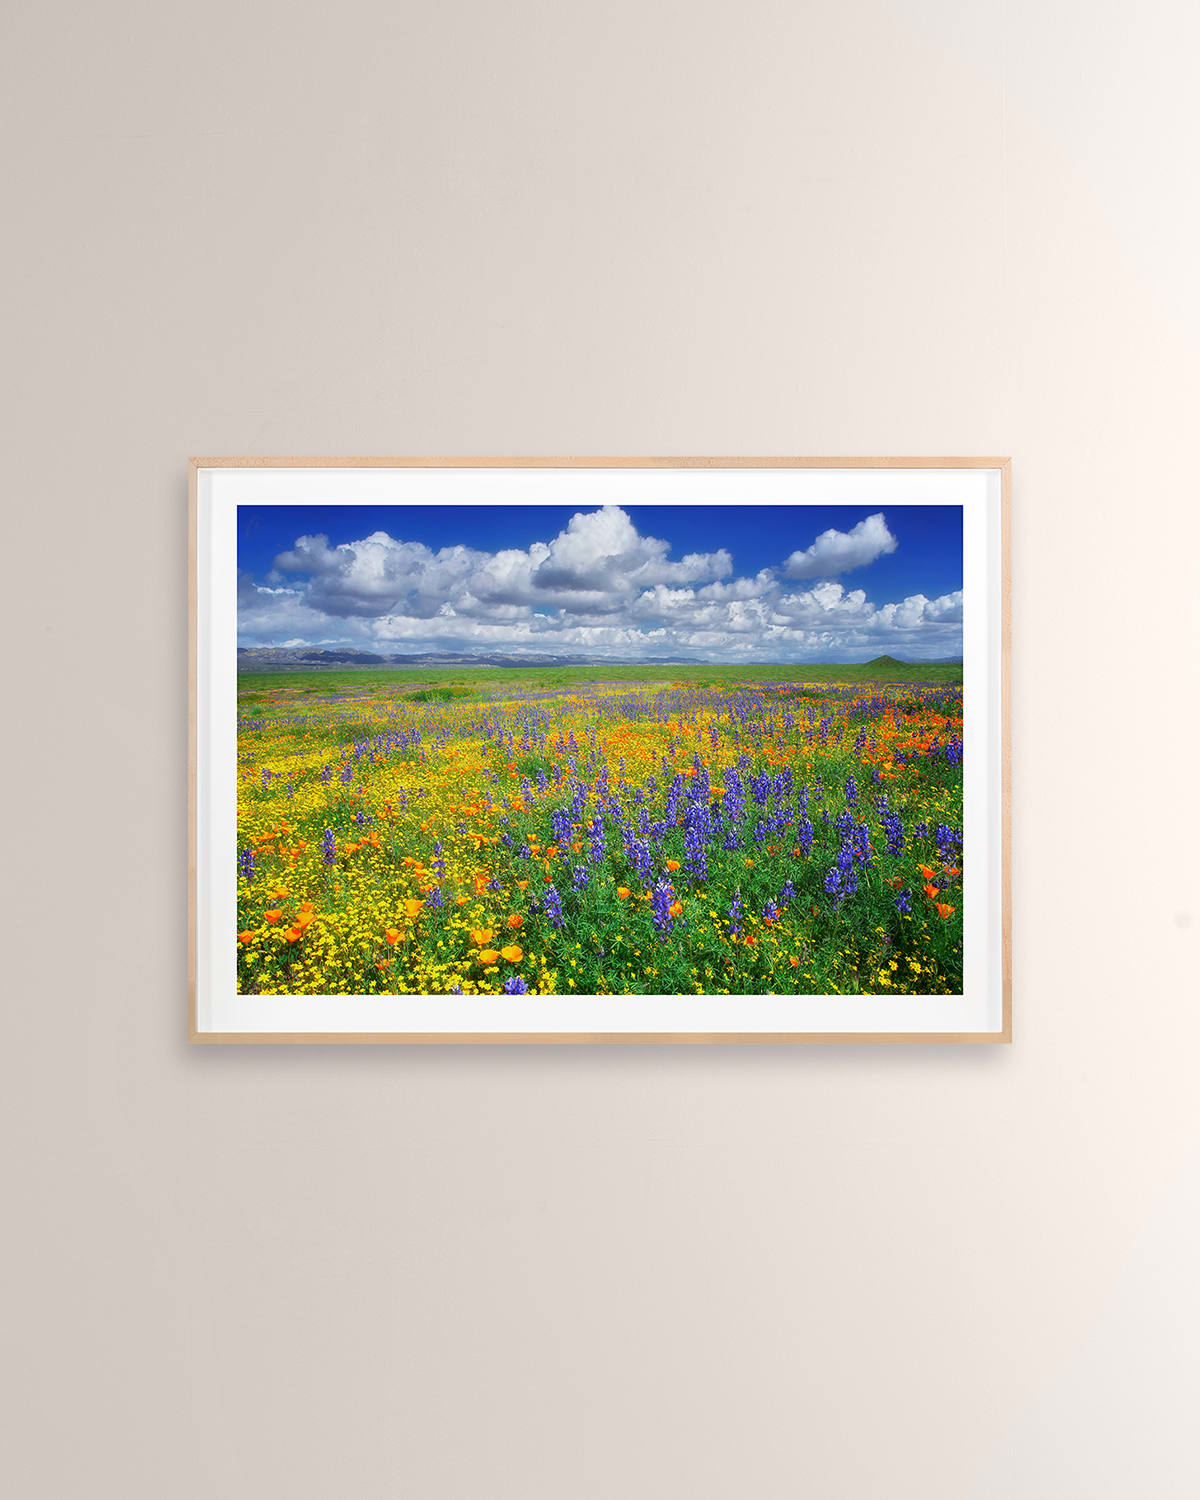 Shop Grand Image Home Lupin And Poppies, Carrizo Plain National Monument Digital Art Print By Photodf In Maple